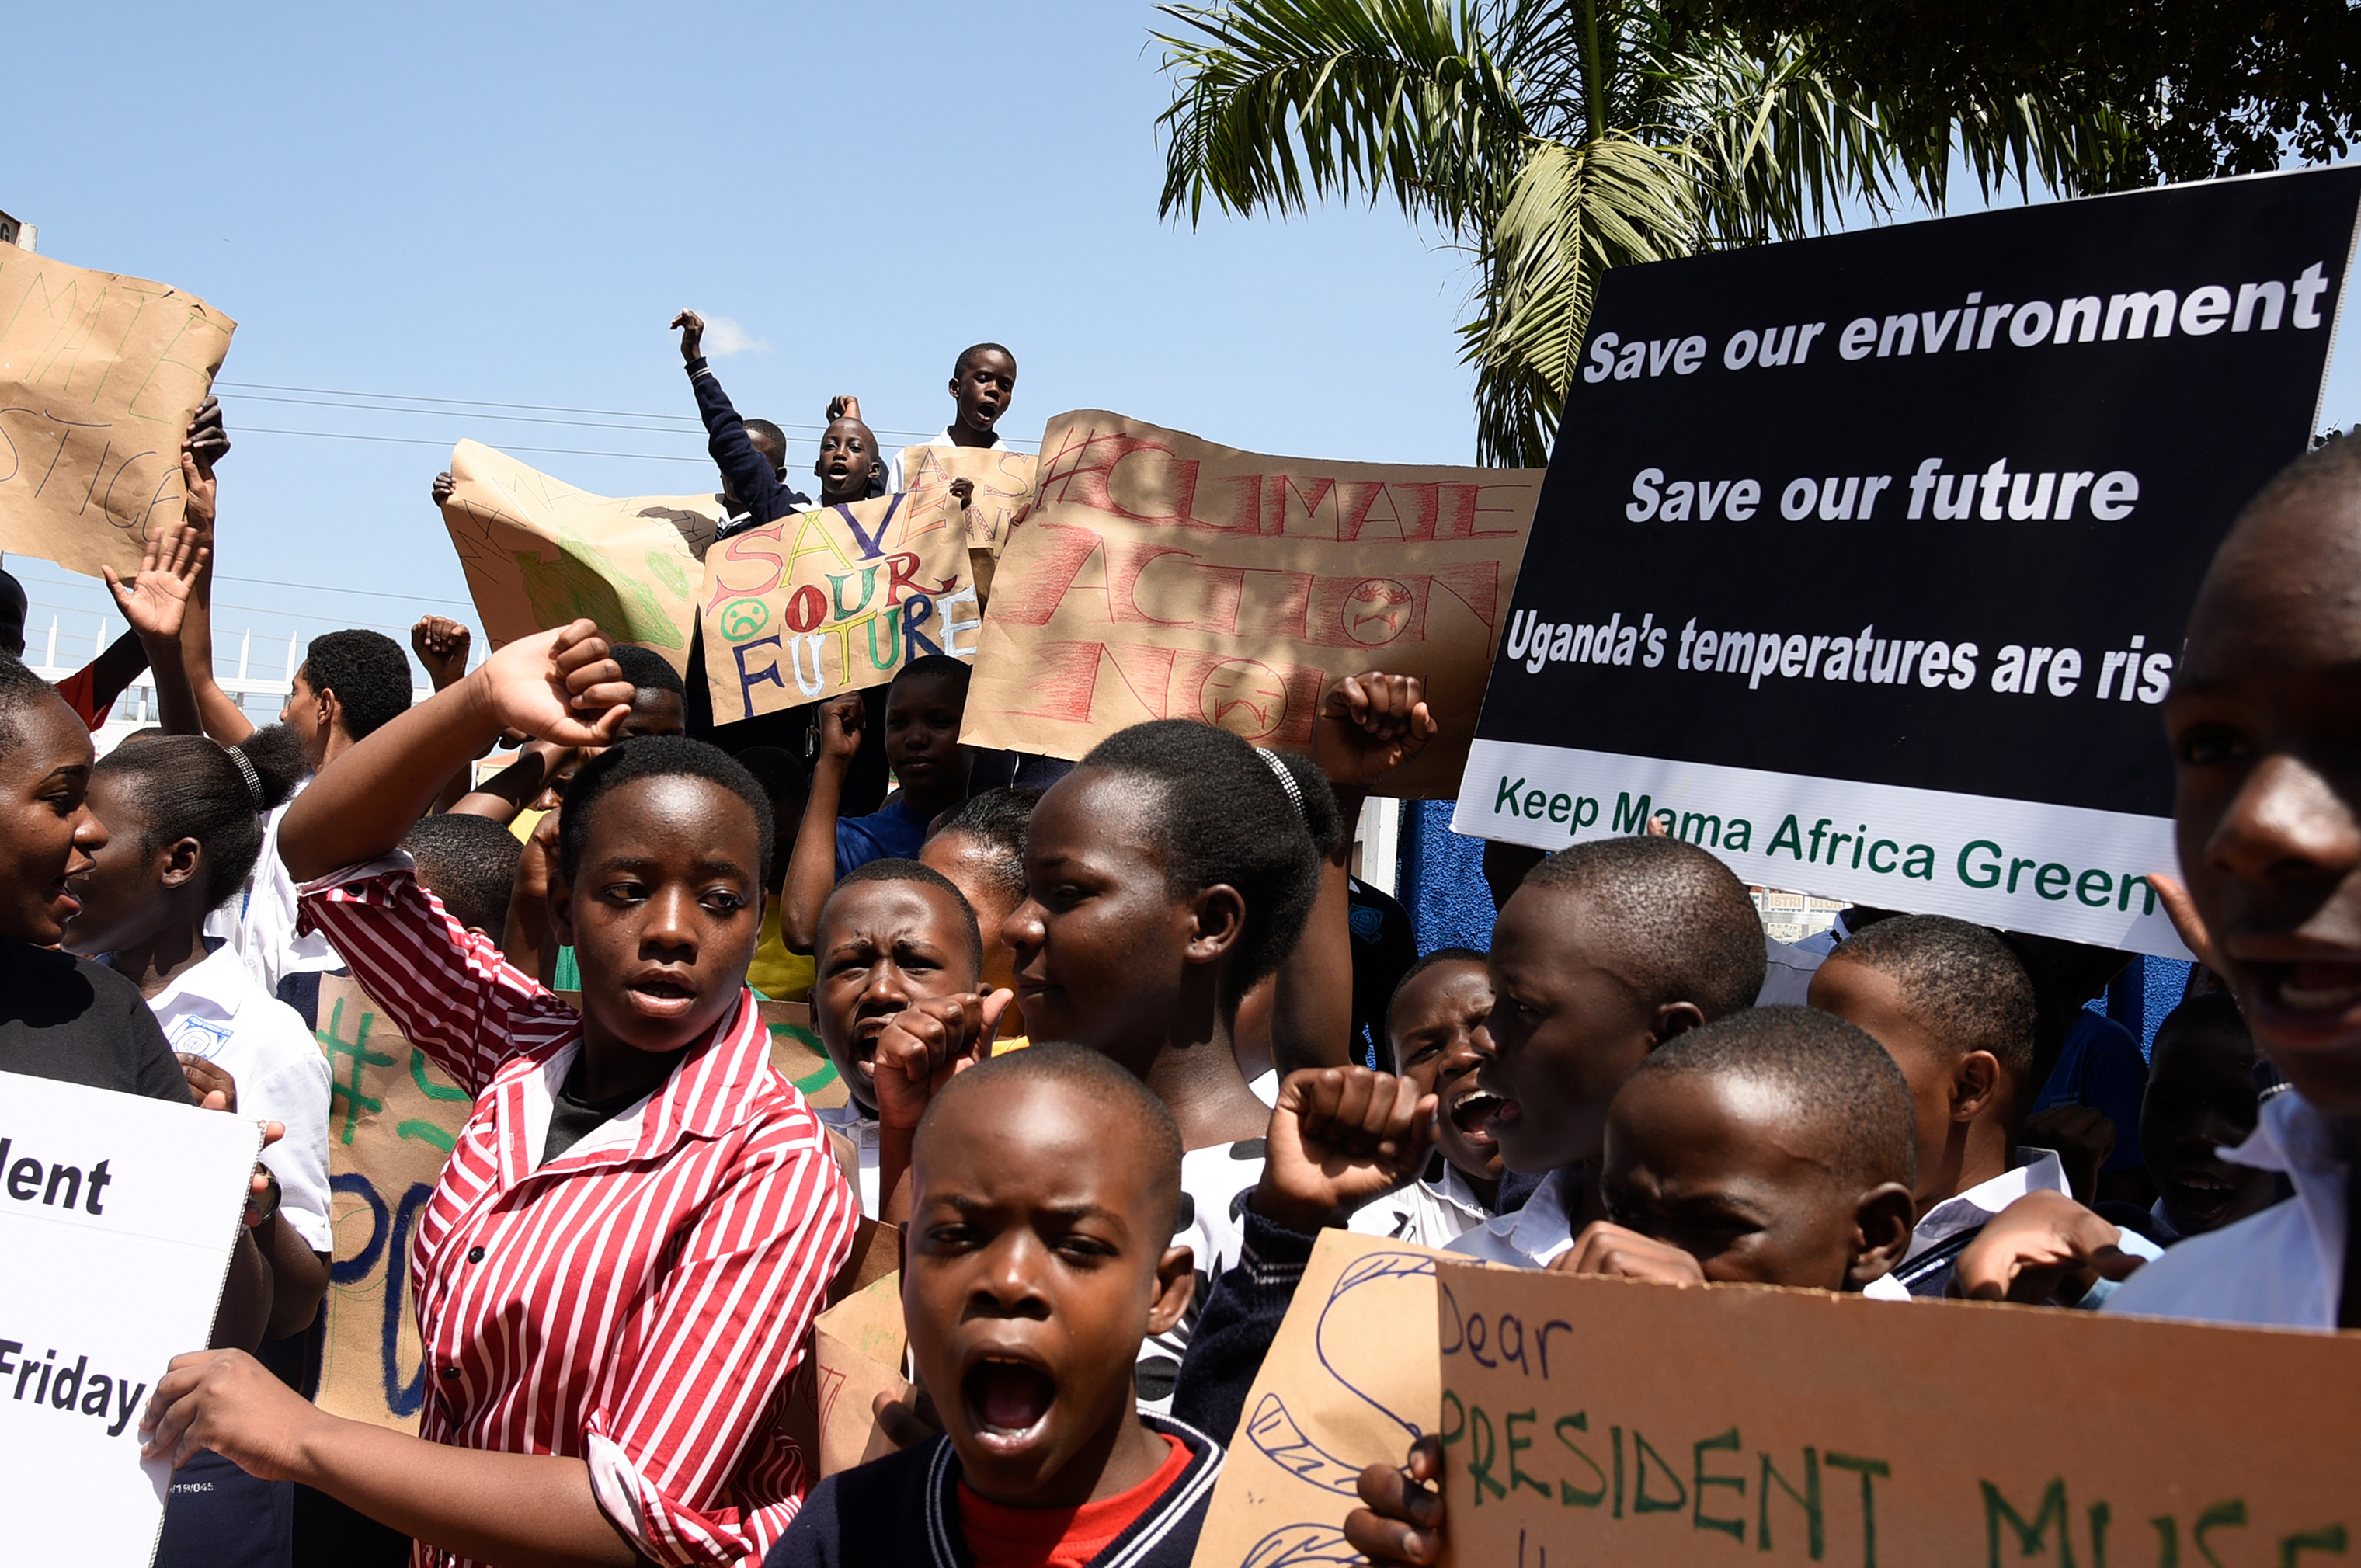 Students hold placards during a strike as part of a global day of student protests aiming to spark world leaders into action on climate change, in Kampala, Uganda on March 15, 2019. (Isaac Kasamani—AFP/Getty Images)